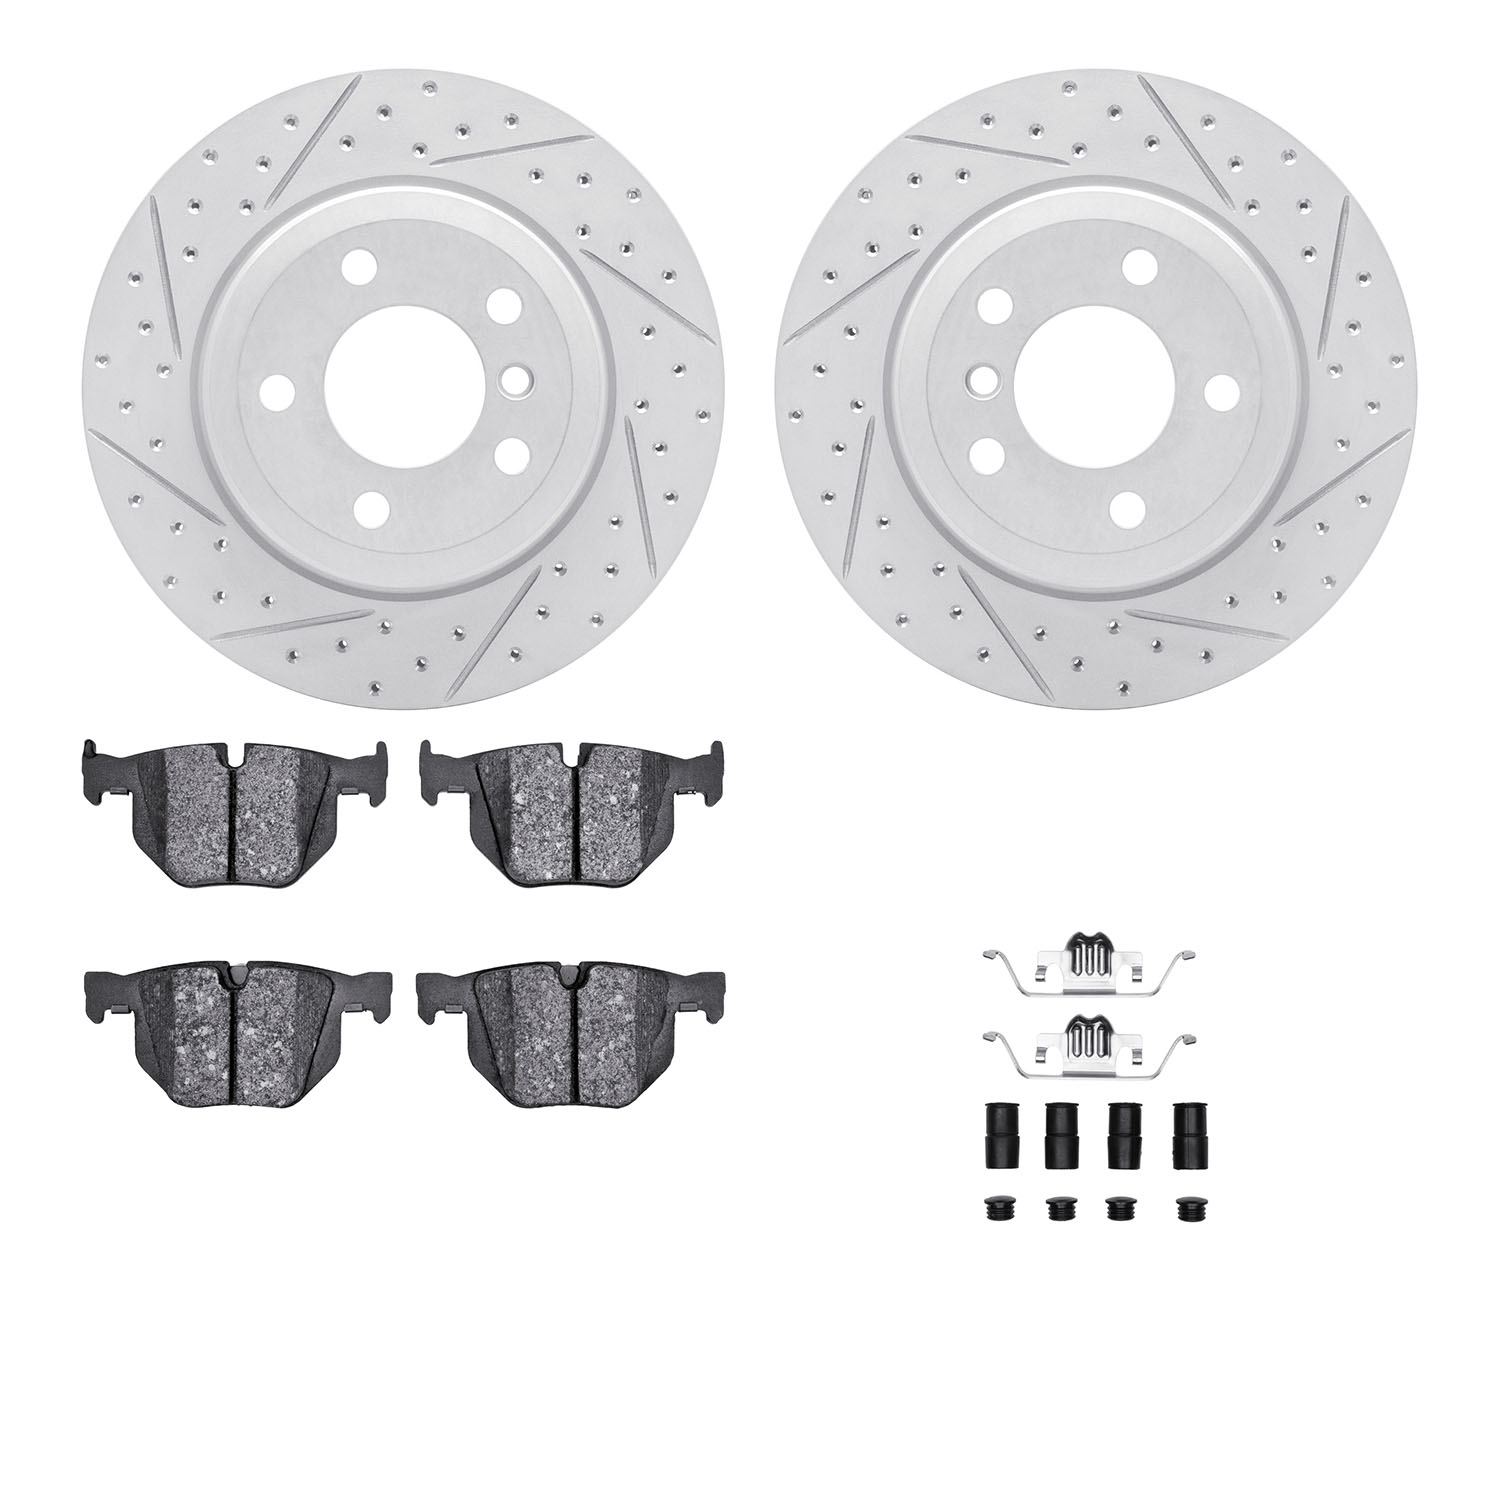 2512-31105 Geoperformance Drilled/Slotted Rotors w/5000 Advanced Brake Pads Kit & Hardware, 2007-2014 BMW, Position: Rear